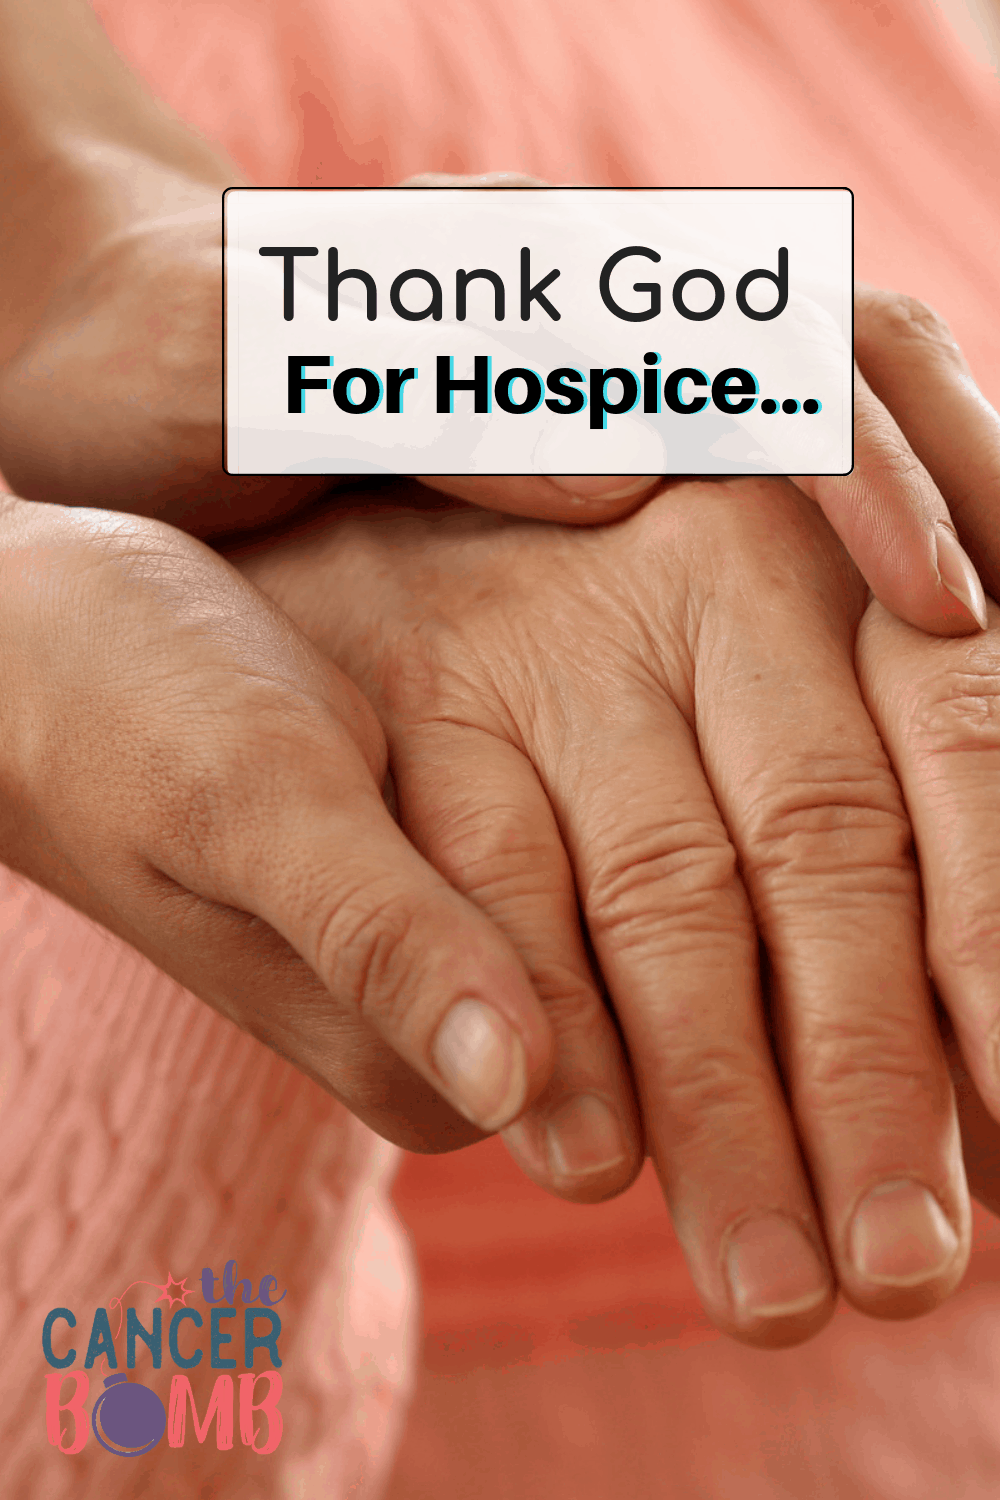 When we found that we could no longer fight and we had to face the idea of death instead changing directions was terrifying and confusing. Hospice had tips and ideas to deal with EVERYTHING and was the only reason we made it through… #fuckcancer #prayingforacure #nooneshouldhavetodothis #thankgodforhospice #weneedacure